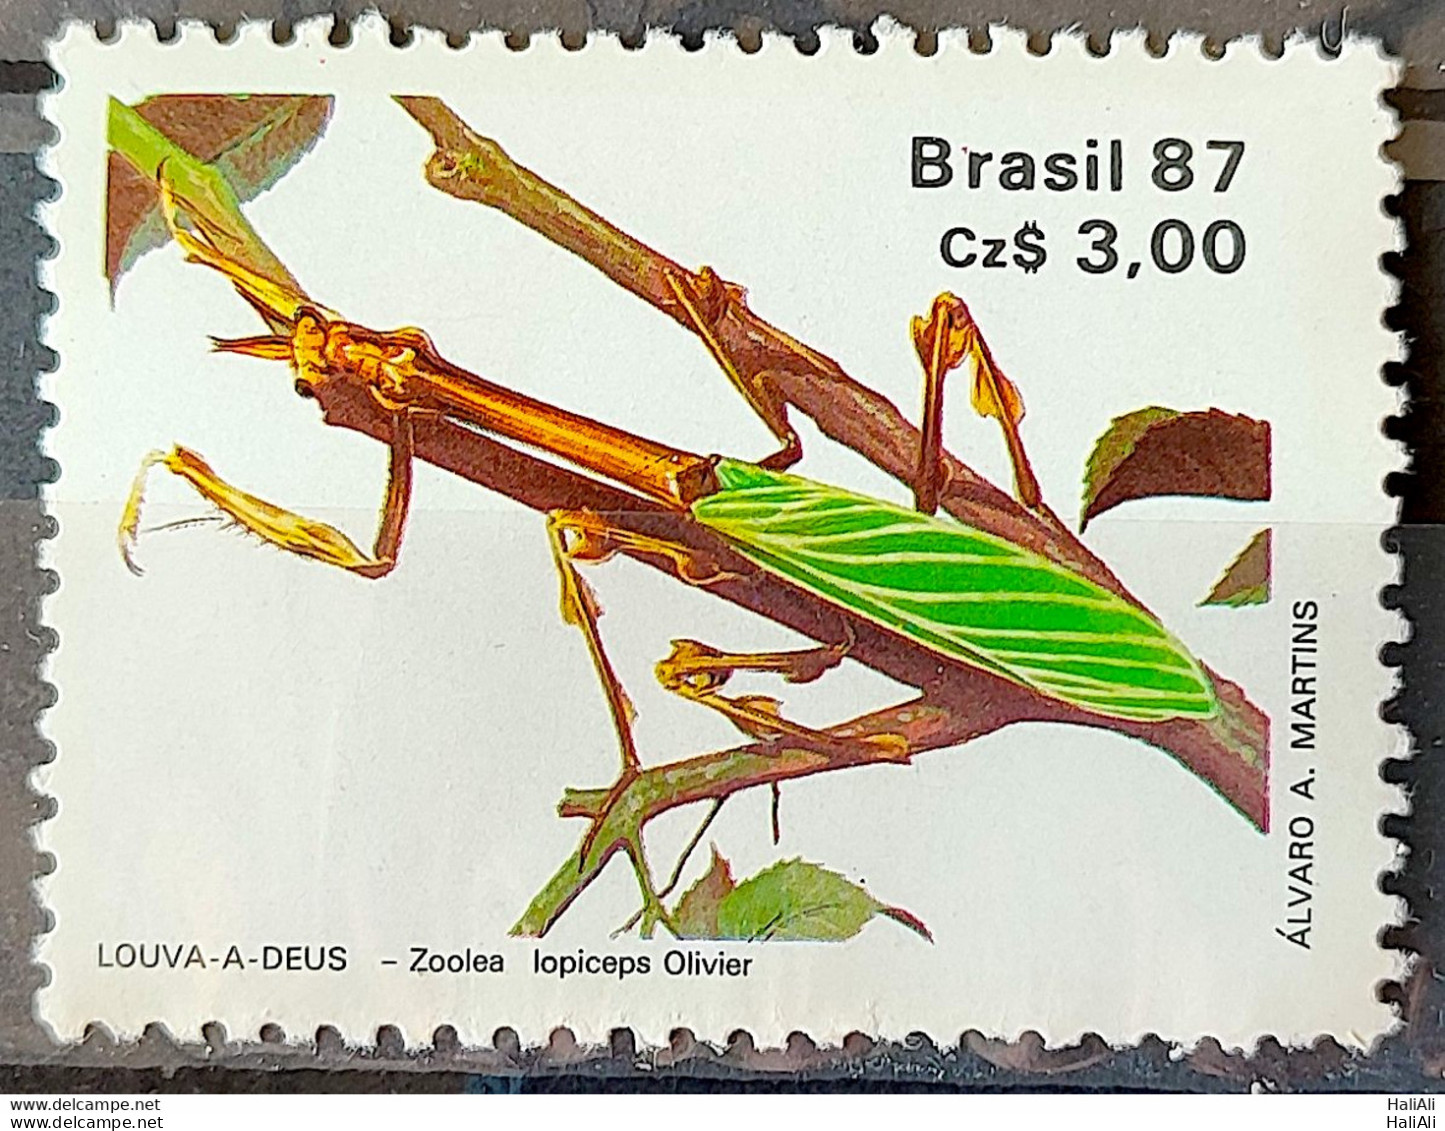 C 1554 Brazil Stamp 50 Years Brazilian Insect Entomology Society Praise To God 1987 - Unused Stamps